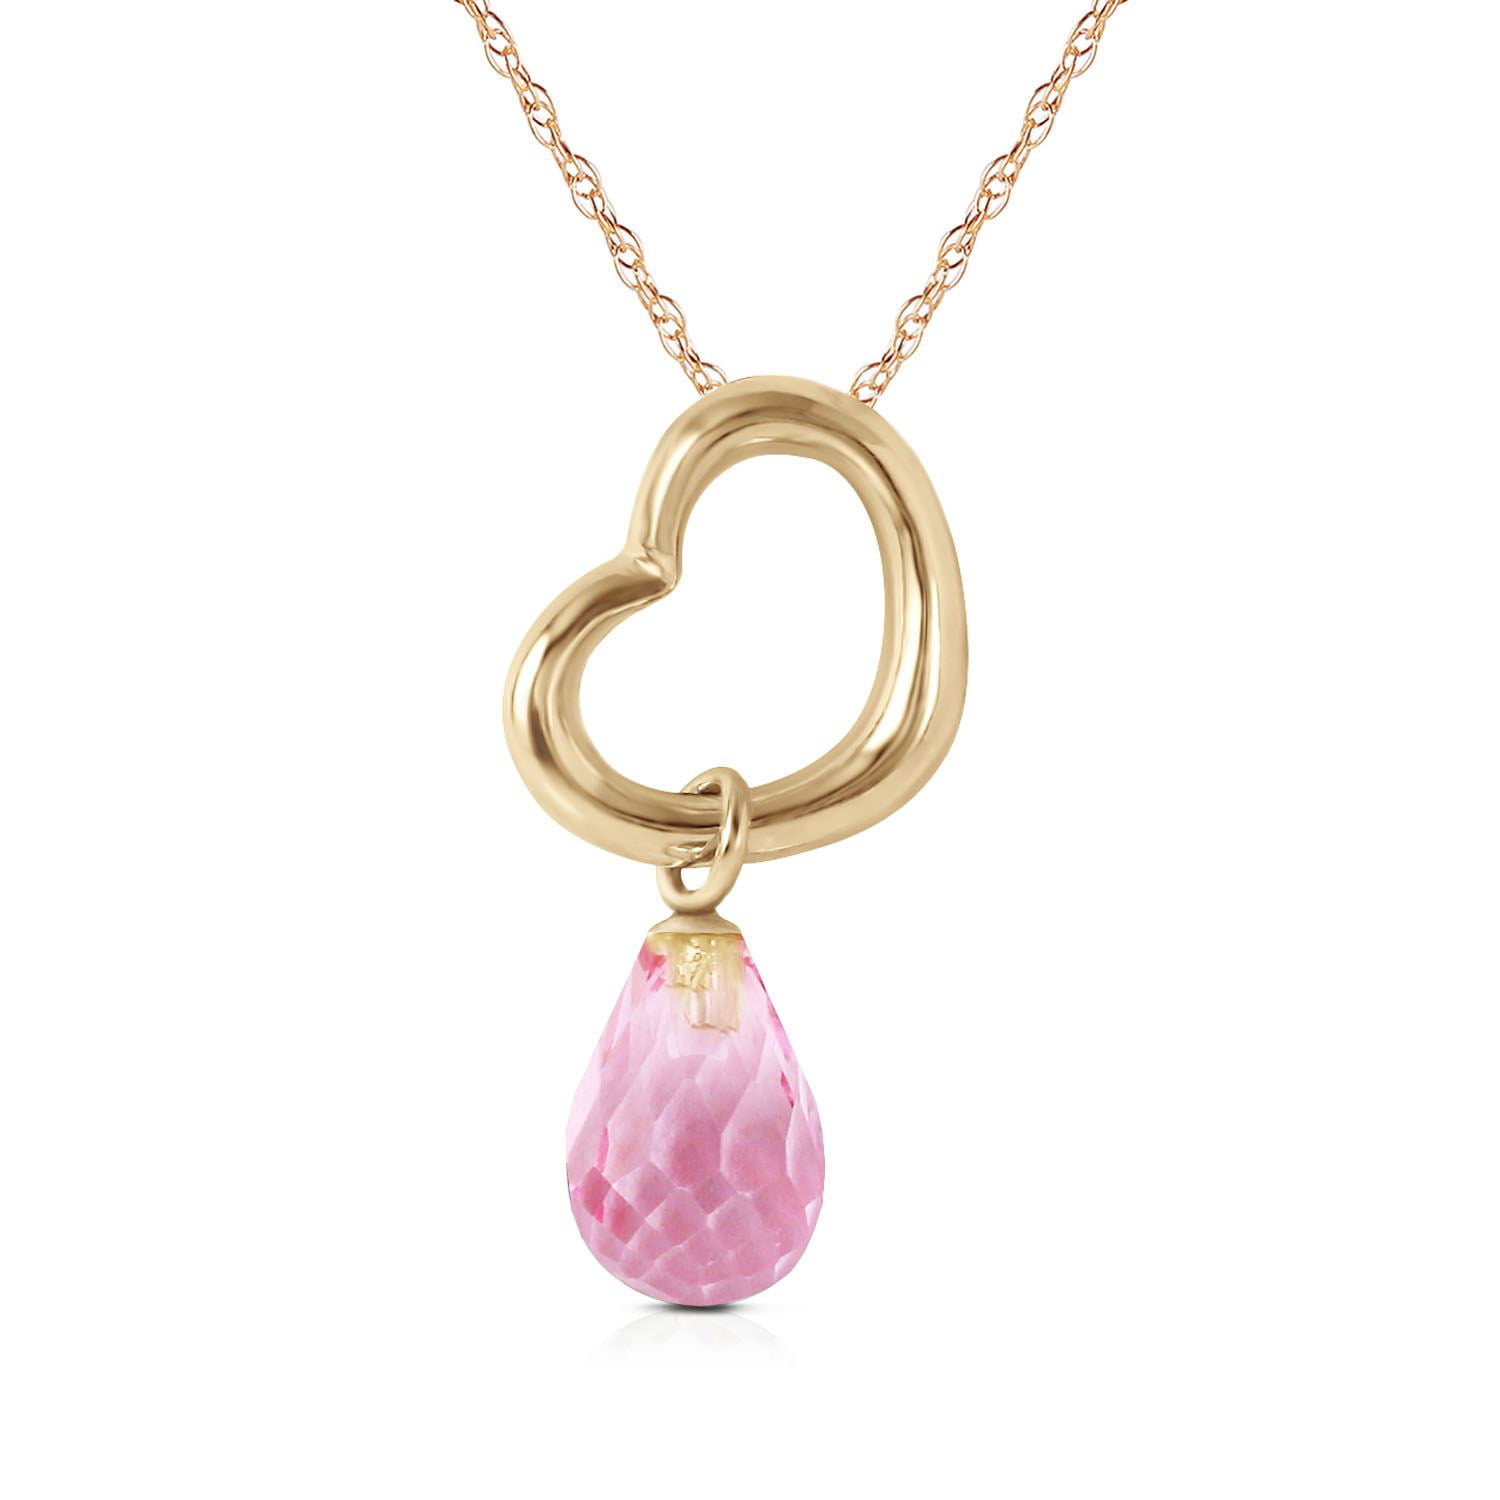 ALARRI 3.6 Carat 14K Solid Rose Gold Necklace Natural Pink Topaz with 22 Inch Chain Length